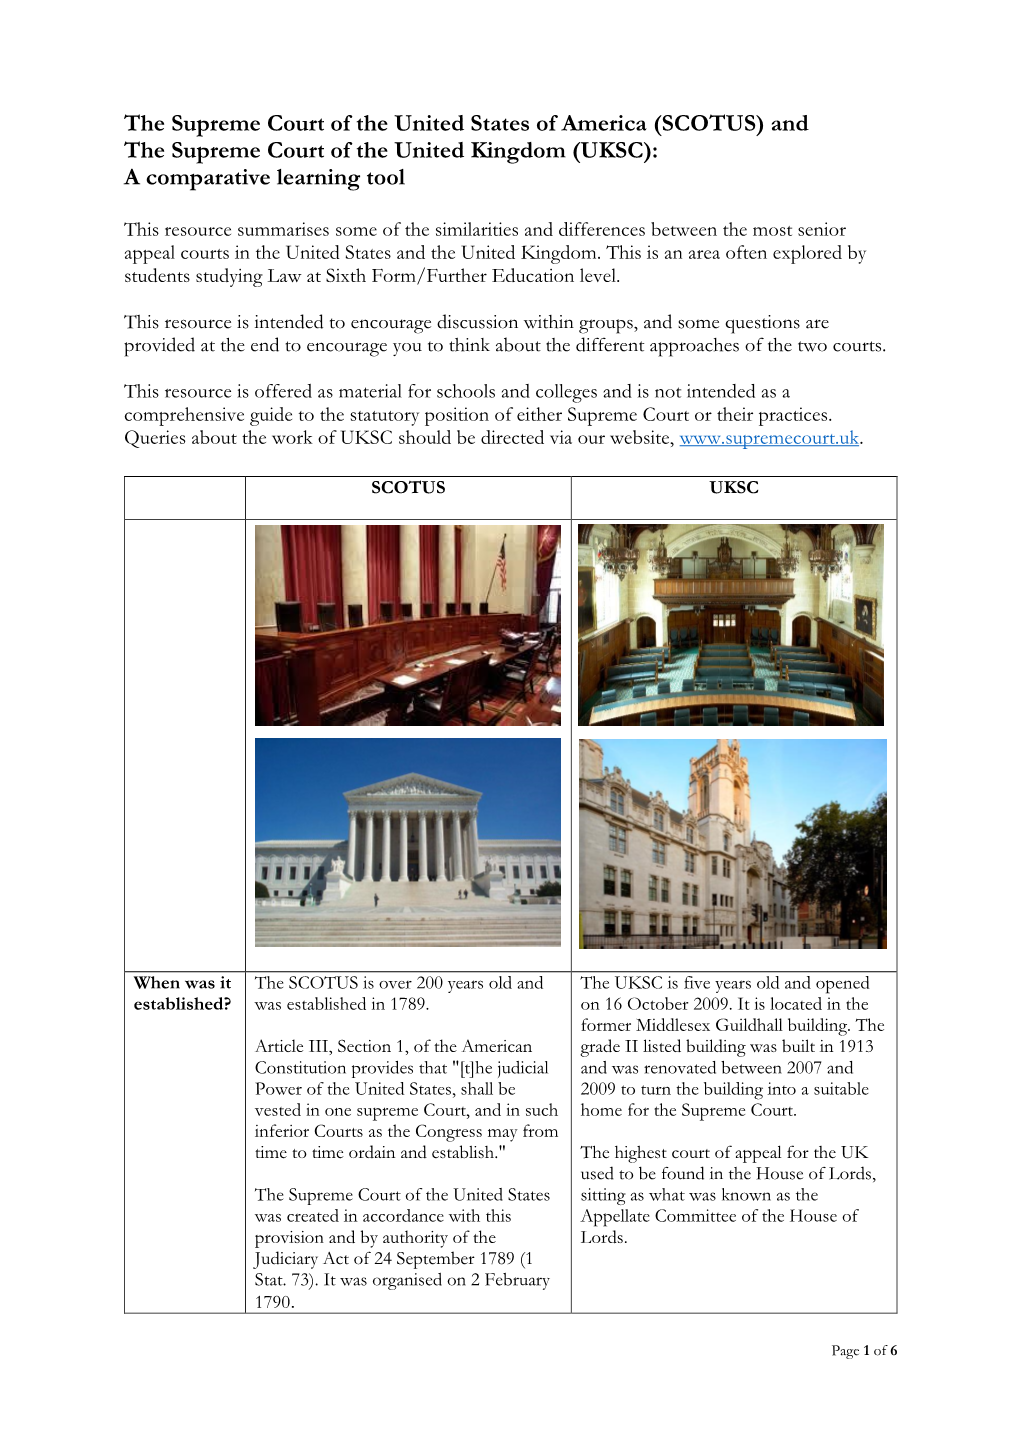 The Supreme Court of the United States and the Supreme Court Of